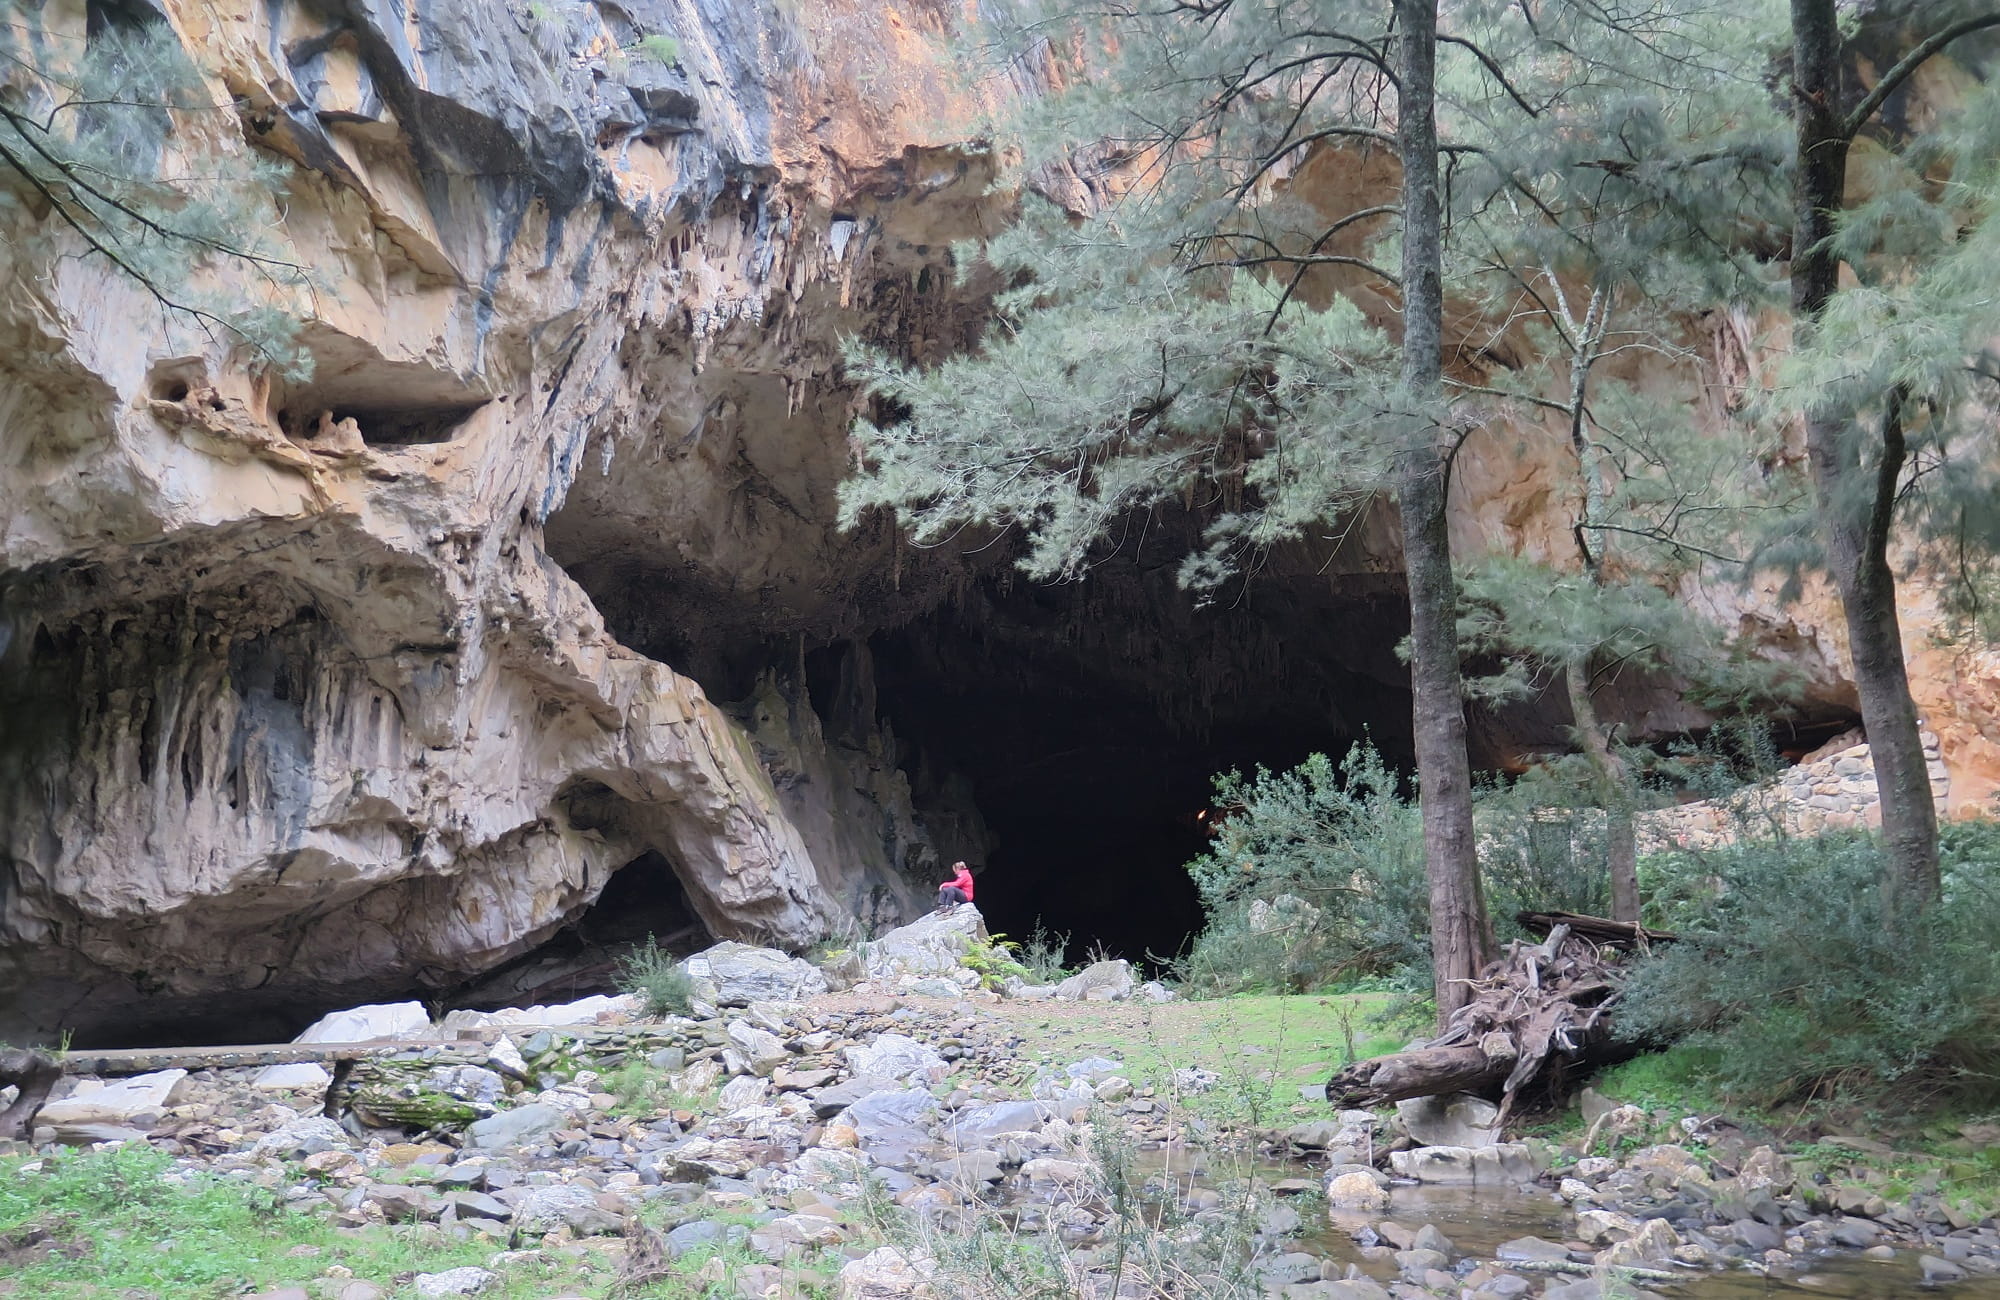 Entrance to Archway Cave, Abercrombie Caves, Abercrombie Karst Conservation Reserve. Photo: Stephen Babka/DPIE